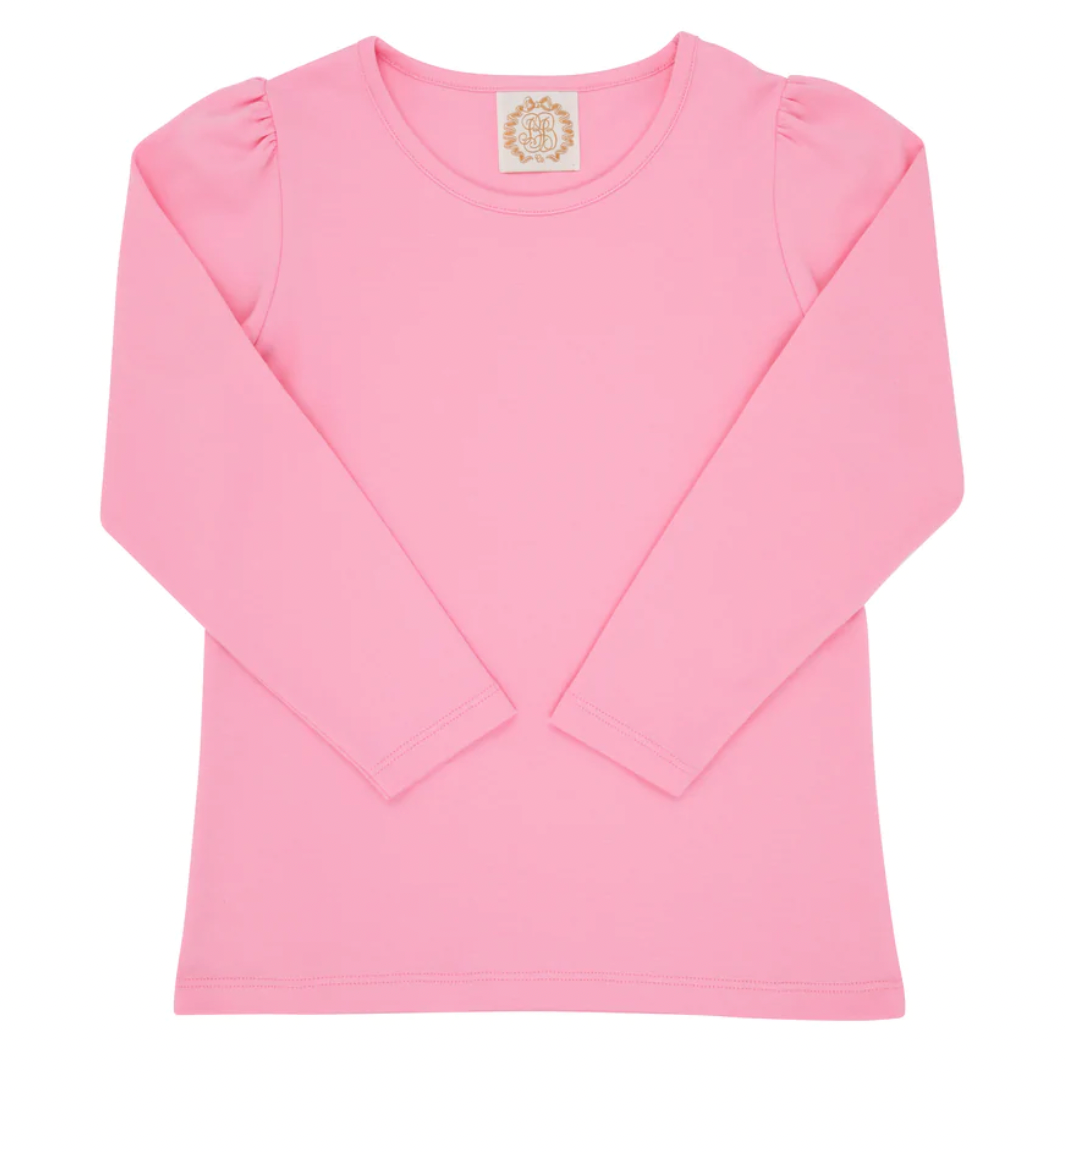 LS Penny's Play Shirt-Hot Pink